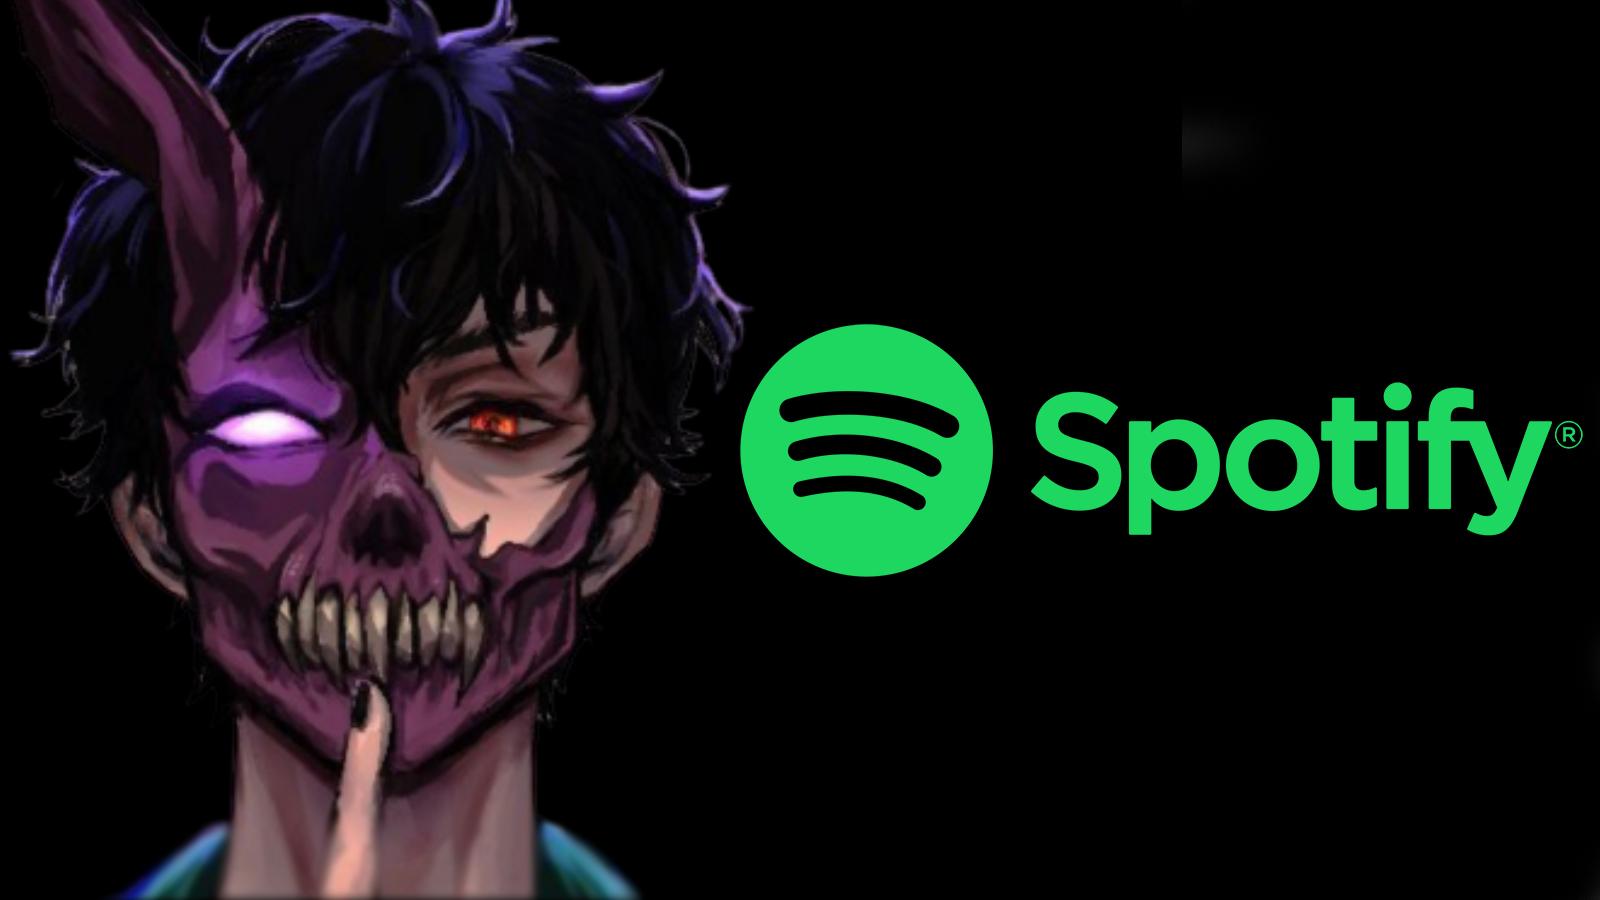 Corpse Husband shades Spotify over play views